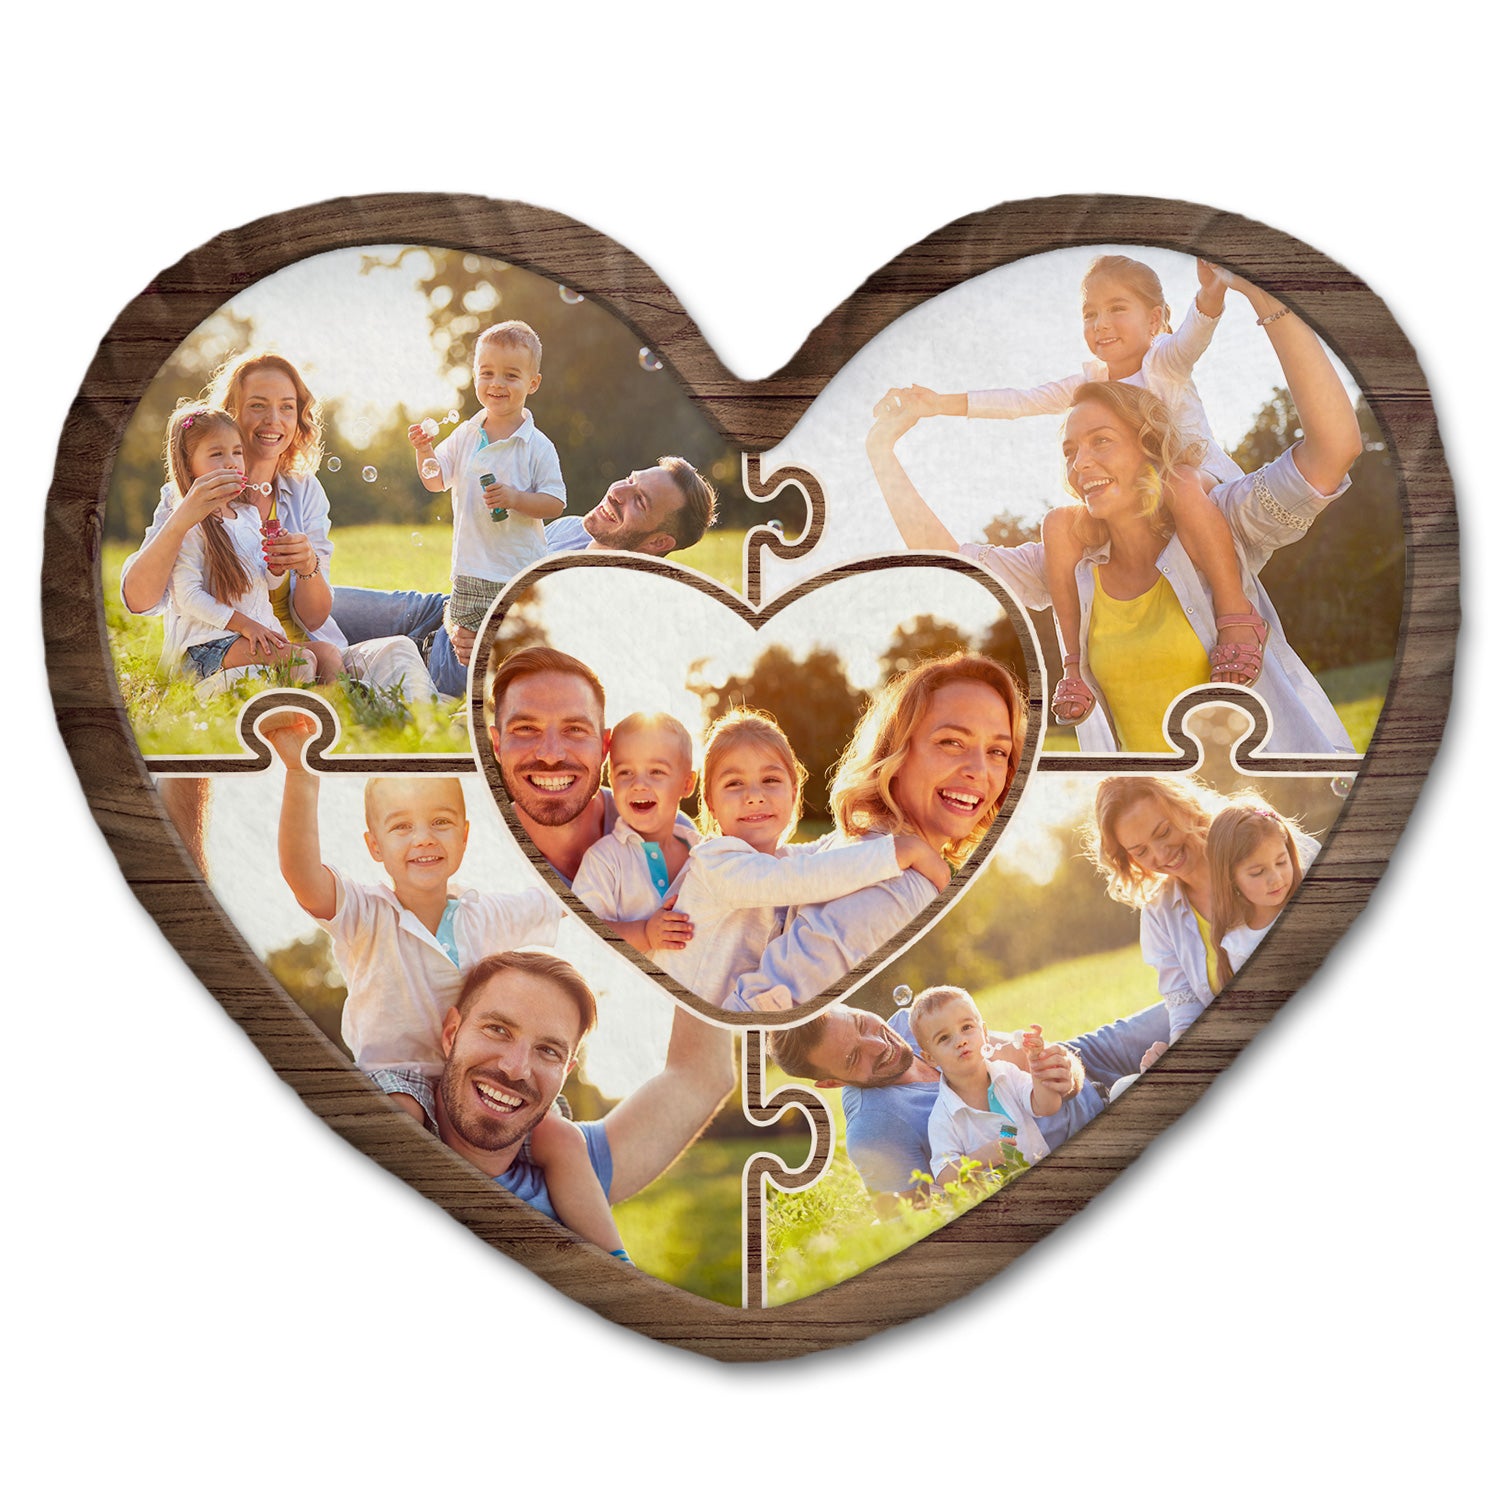 Custom Photo Puzzle Picture - Birthday, Holiday Gift For Parent, Couple, Grandparent - Personalized Heart Shaped Pillow